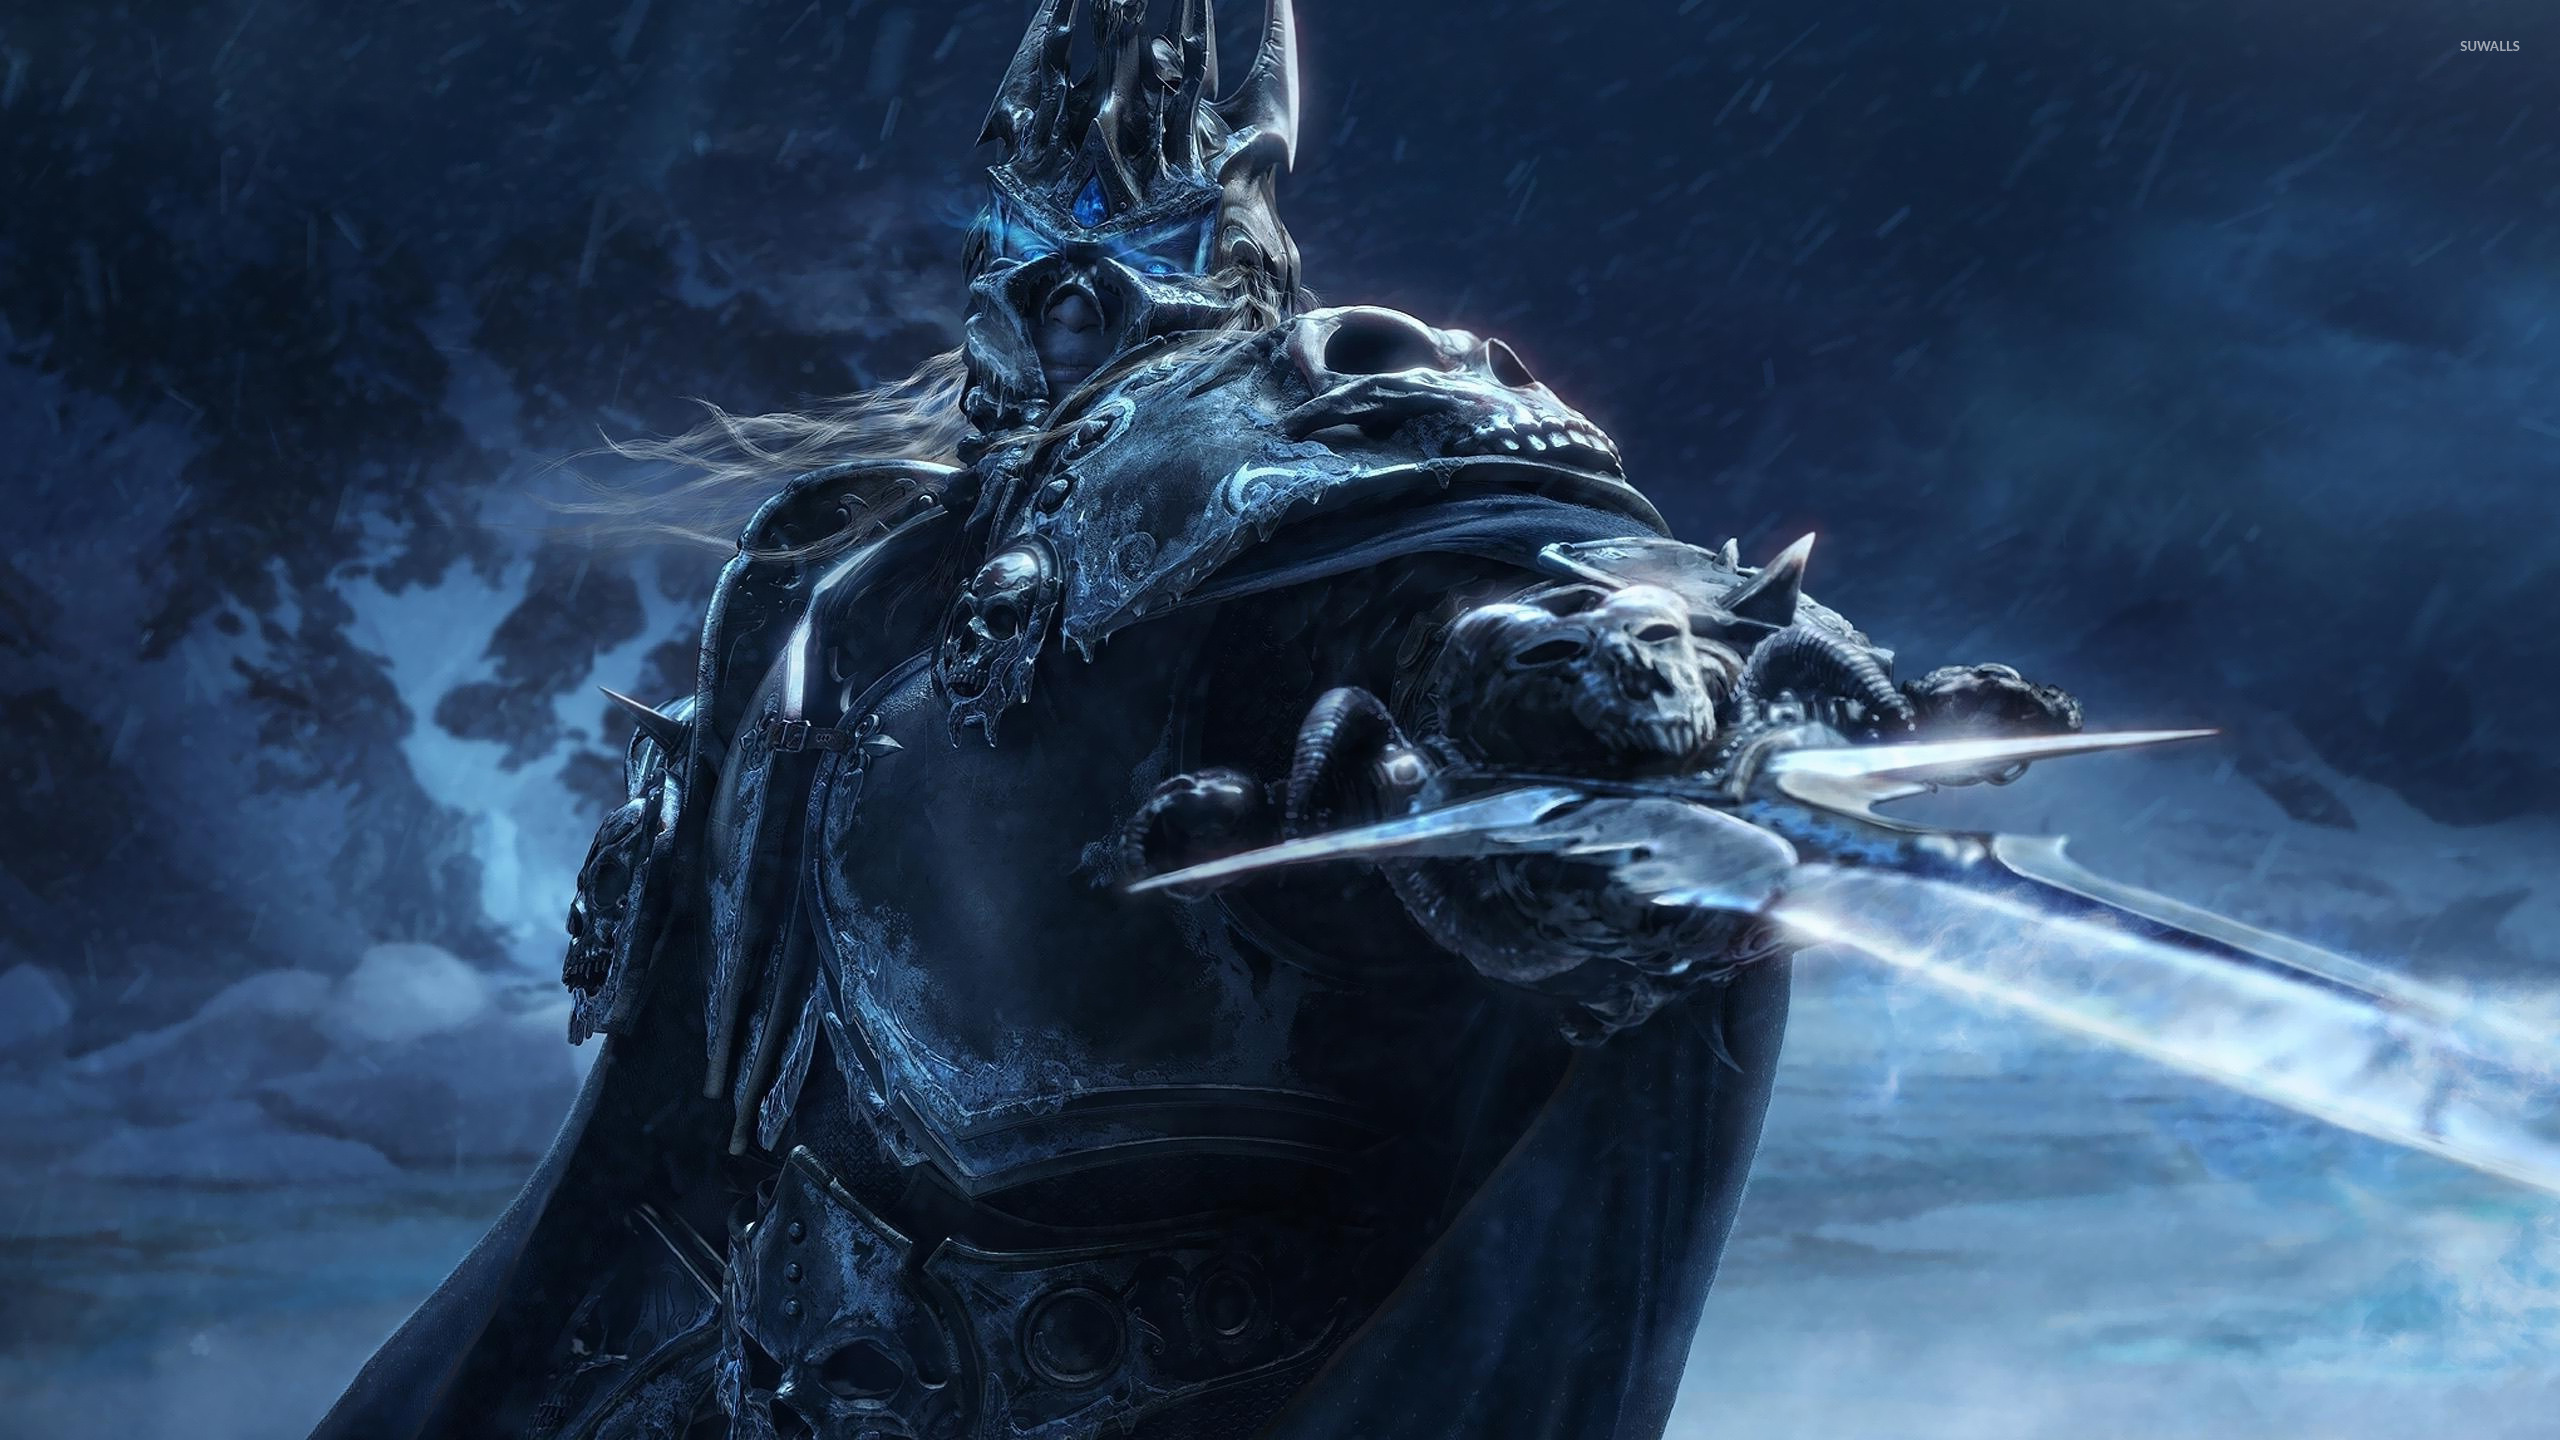 World Of Warcraft: Wrath Of The Lich King Backgrounds on Wallpapers Vista